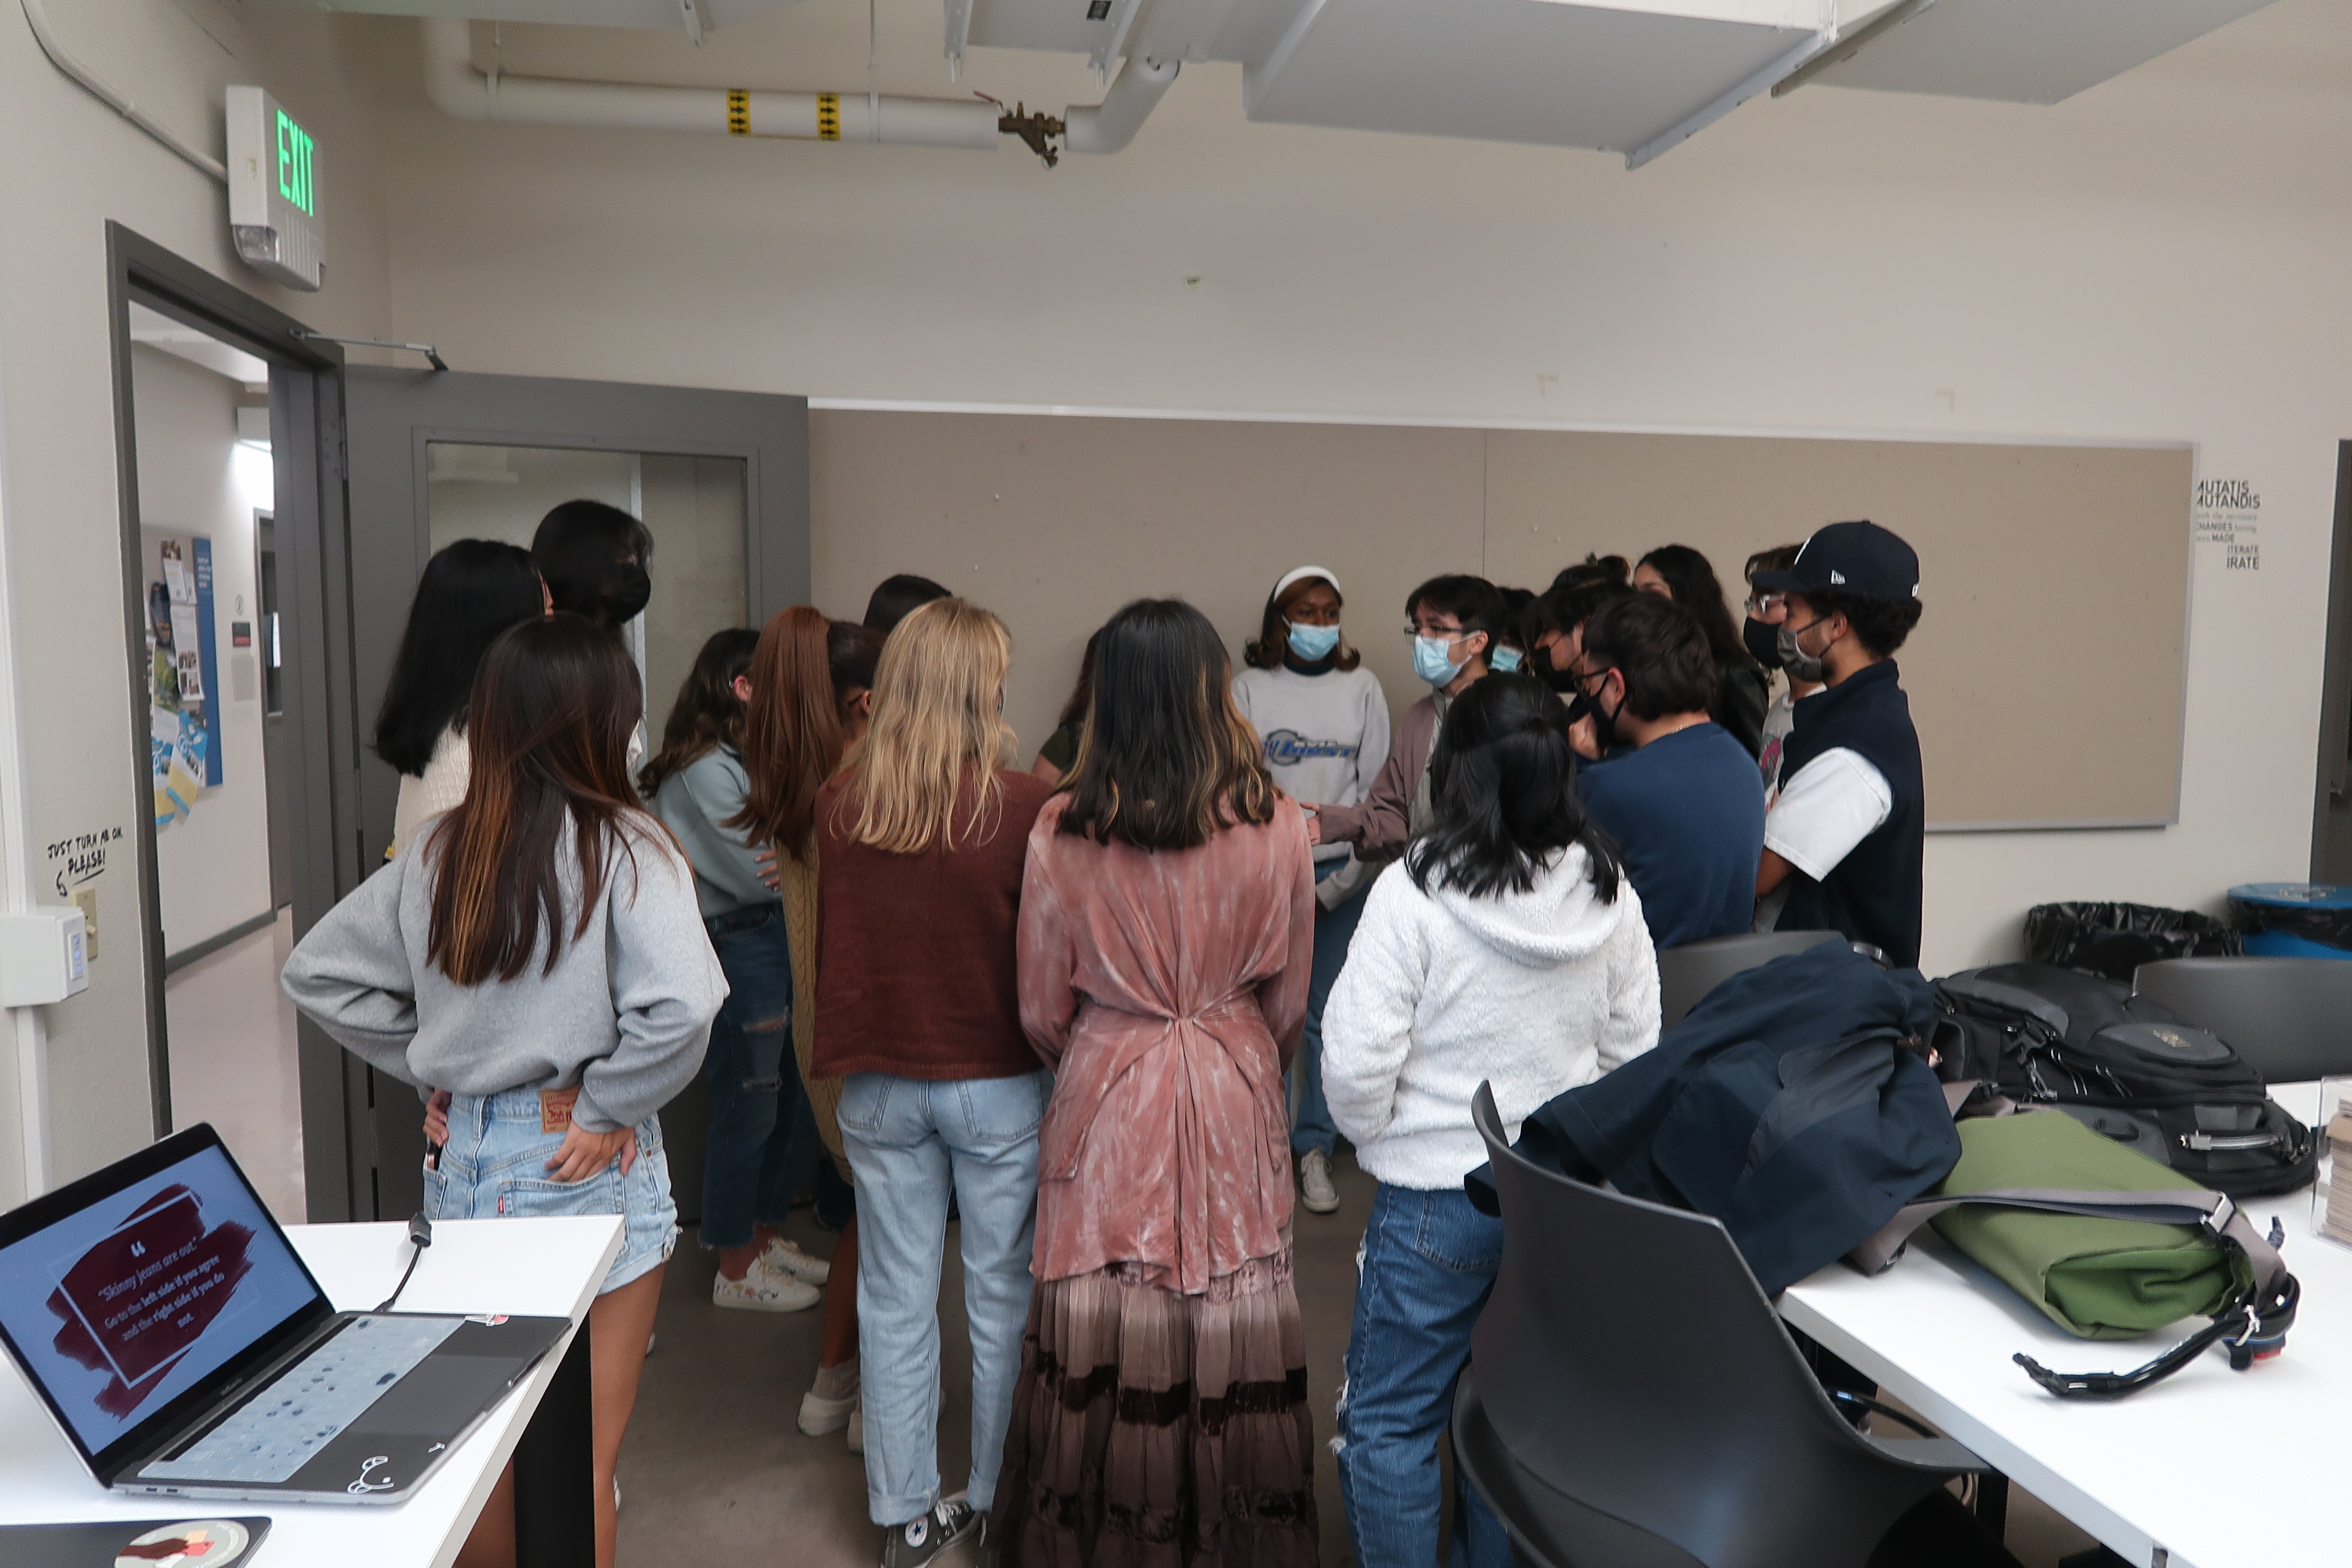 Students gathering in back of fashion room to debate a fashion topic.